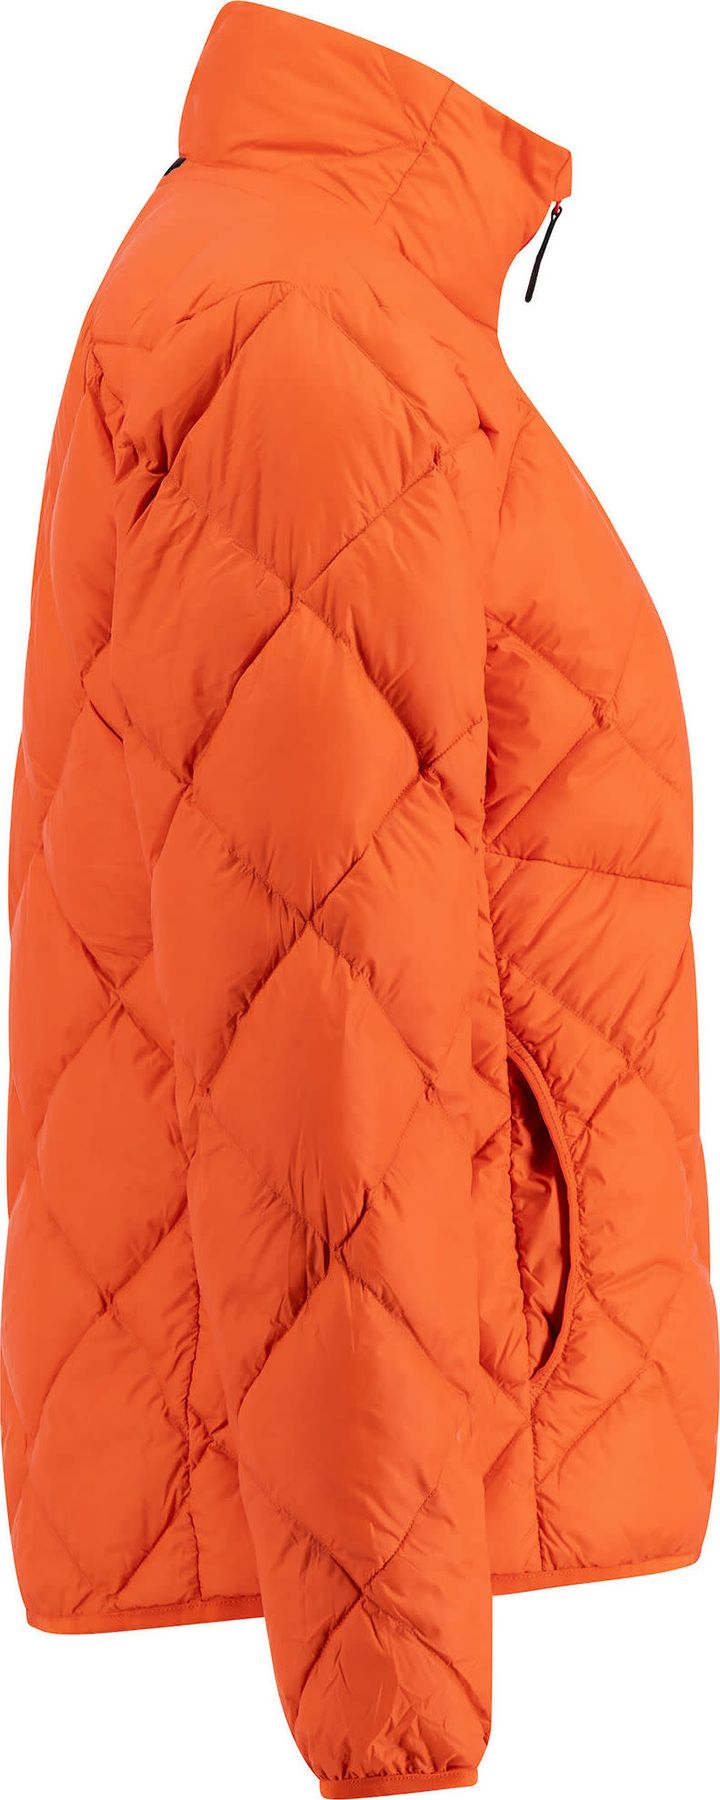 Women's Tived Down Jacket Lively Red Lundhags